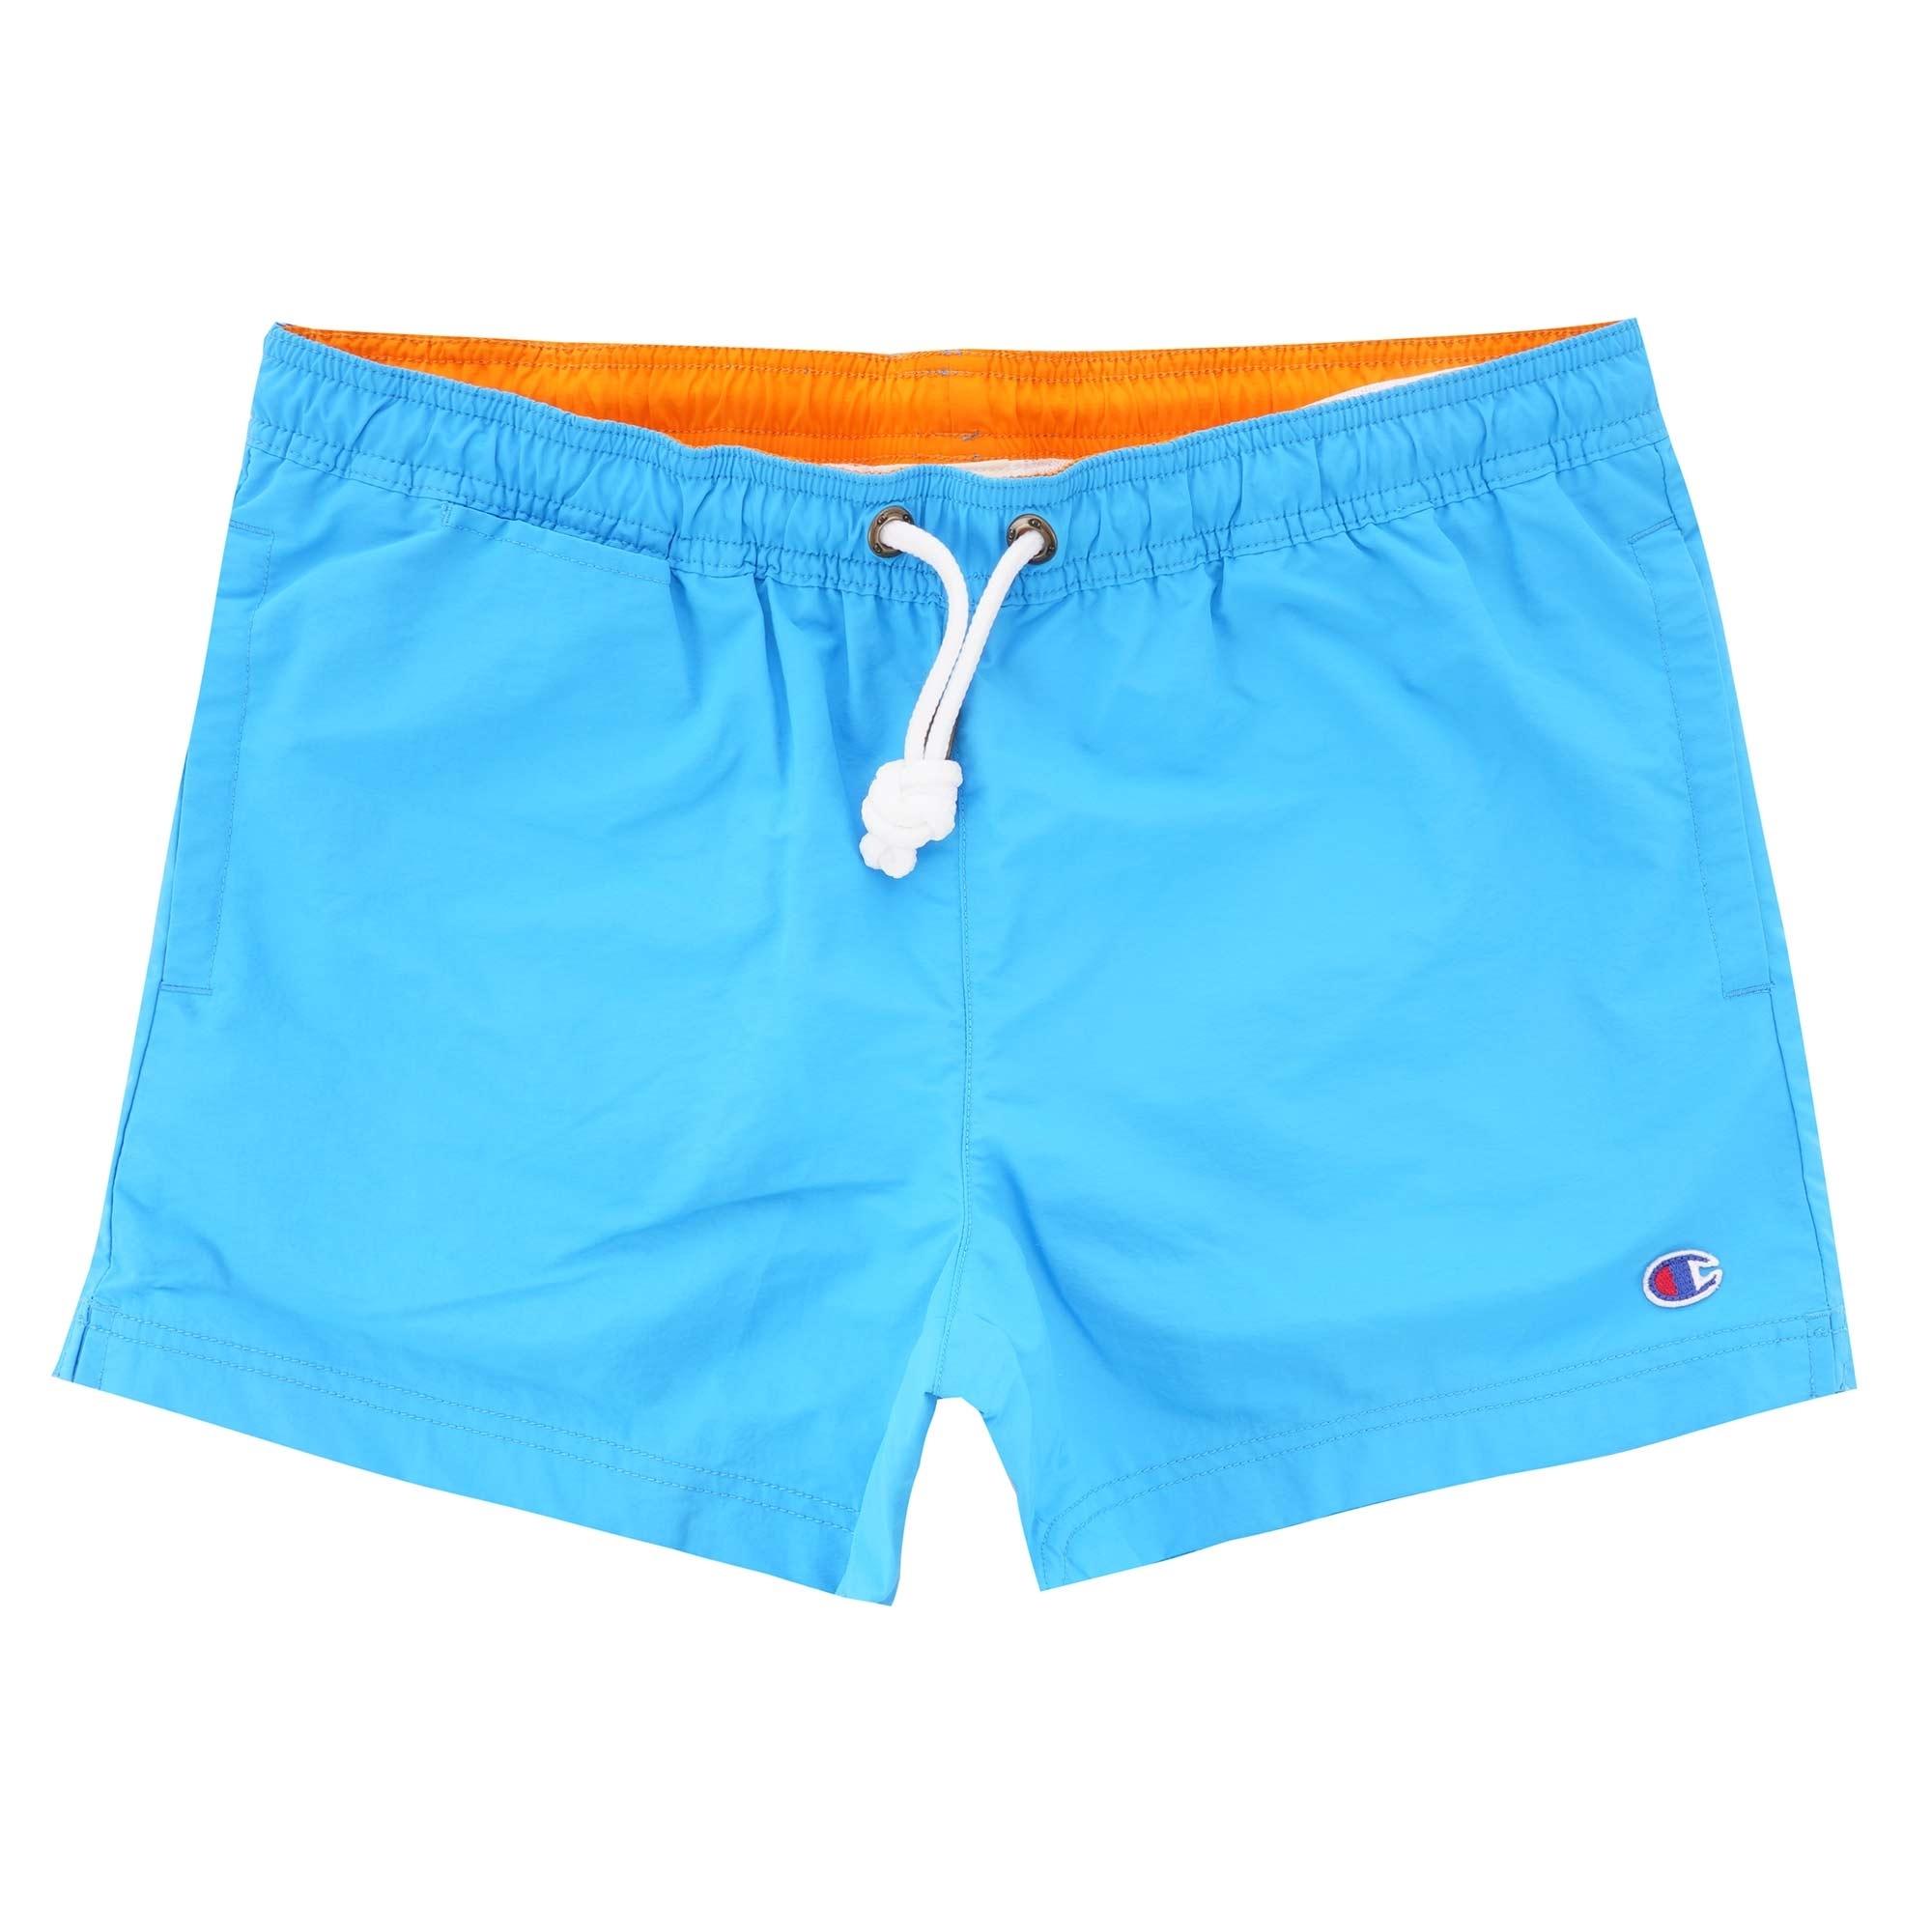 Champion Synthetic Contrast Seam Detail Swim Shorts in Blue for Men - Lyst